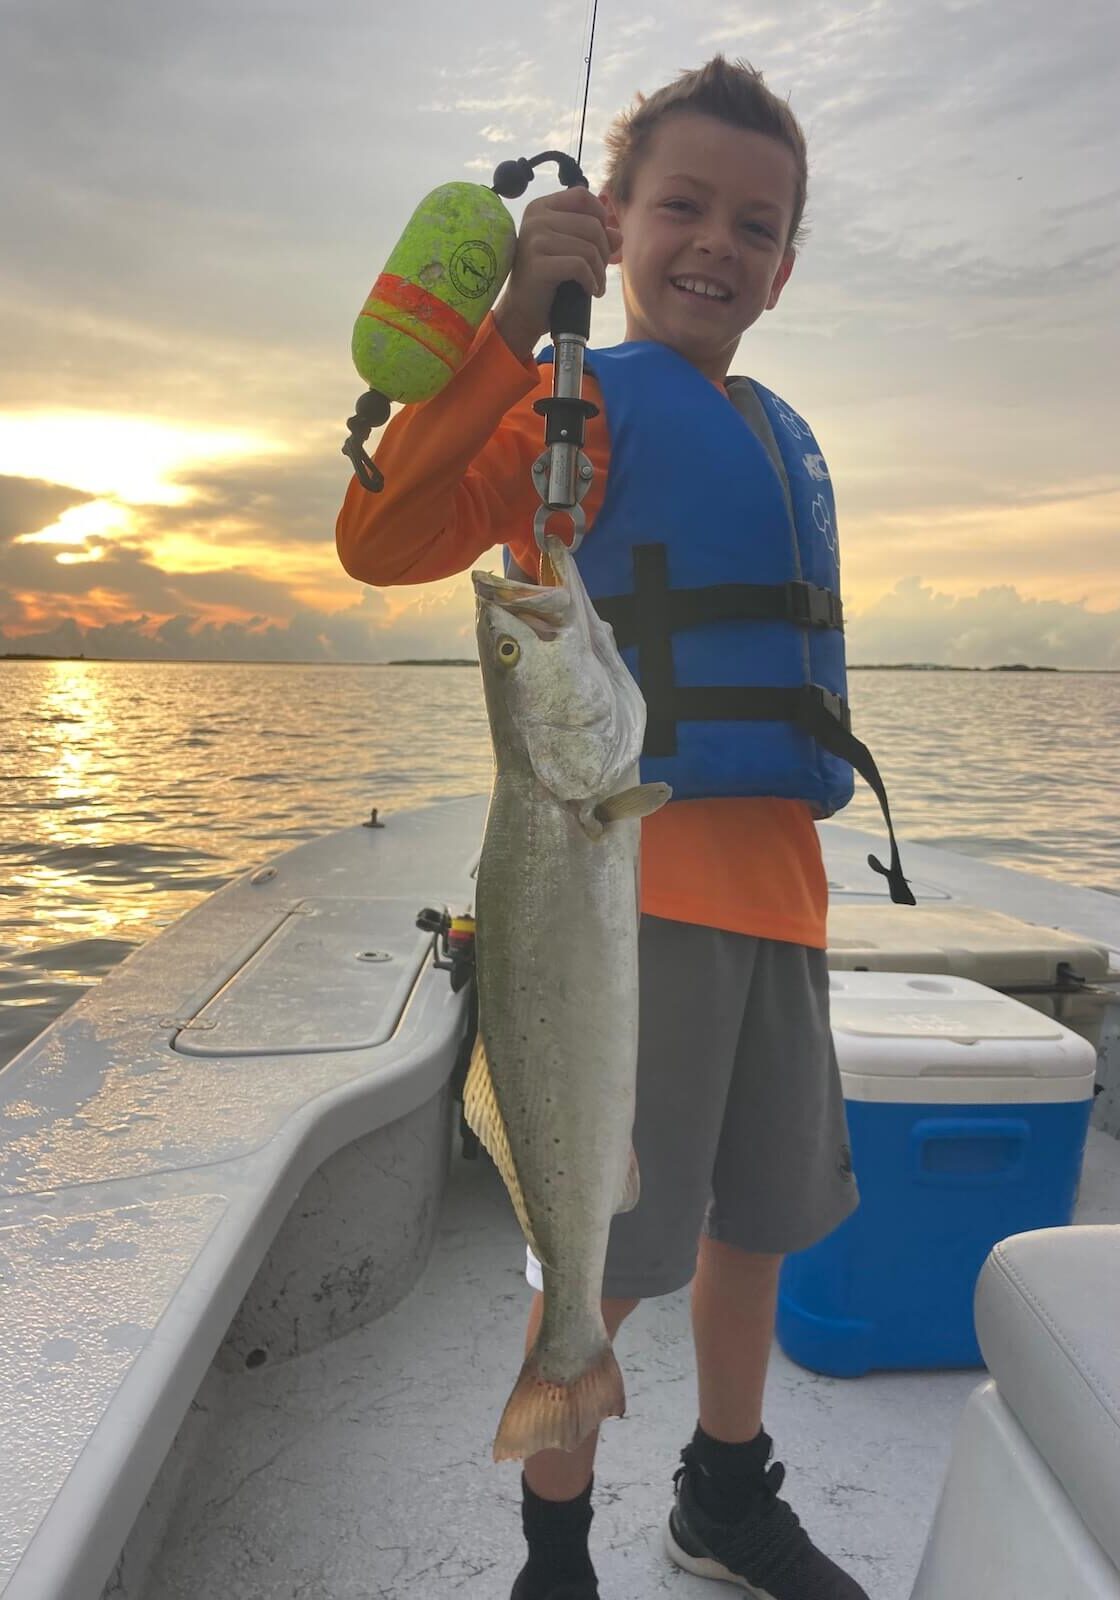 Speckled Trout Fishing